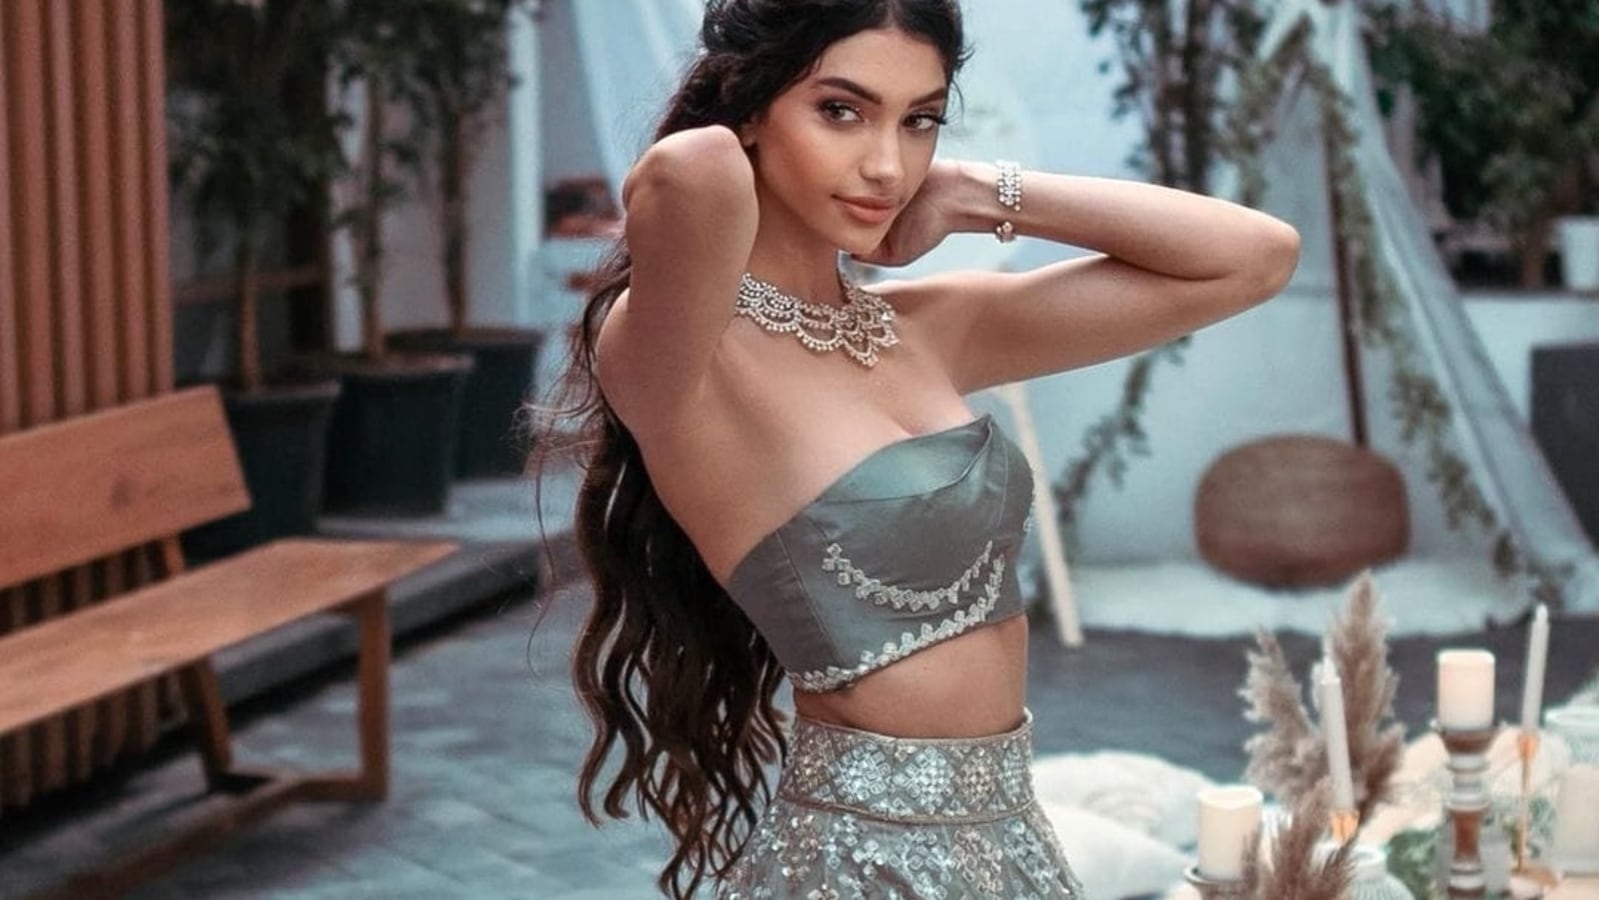 Alanna Panday's sizzling engagement look in strapless grey lehenga has us hooked | Hindustan Times